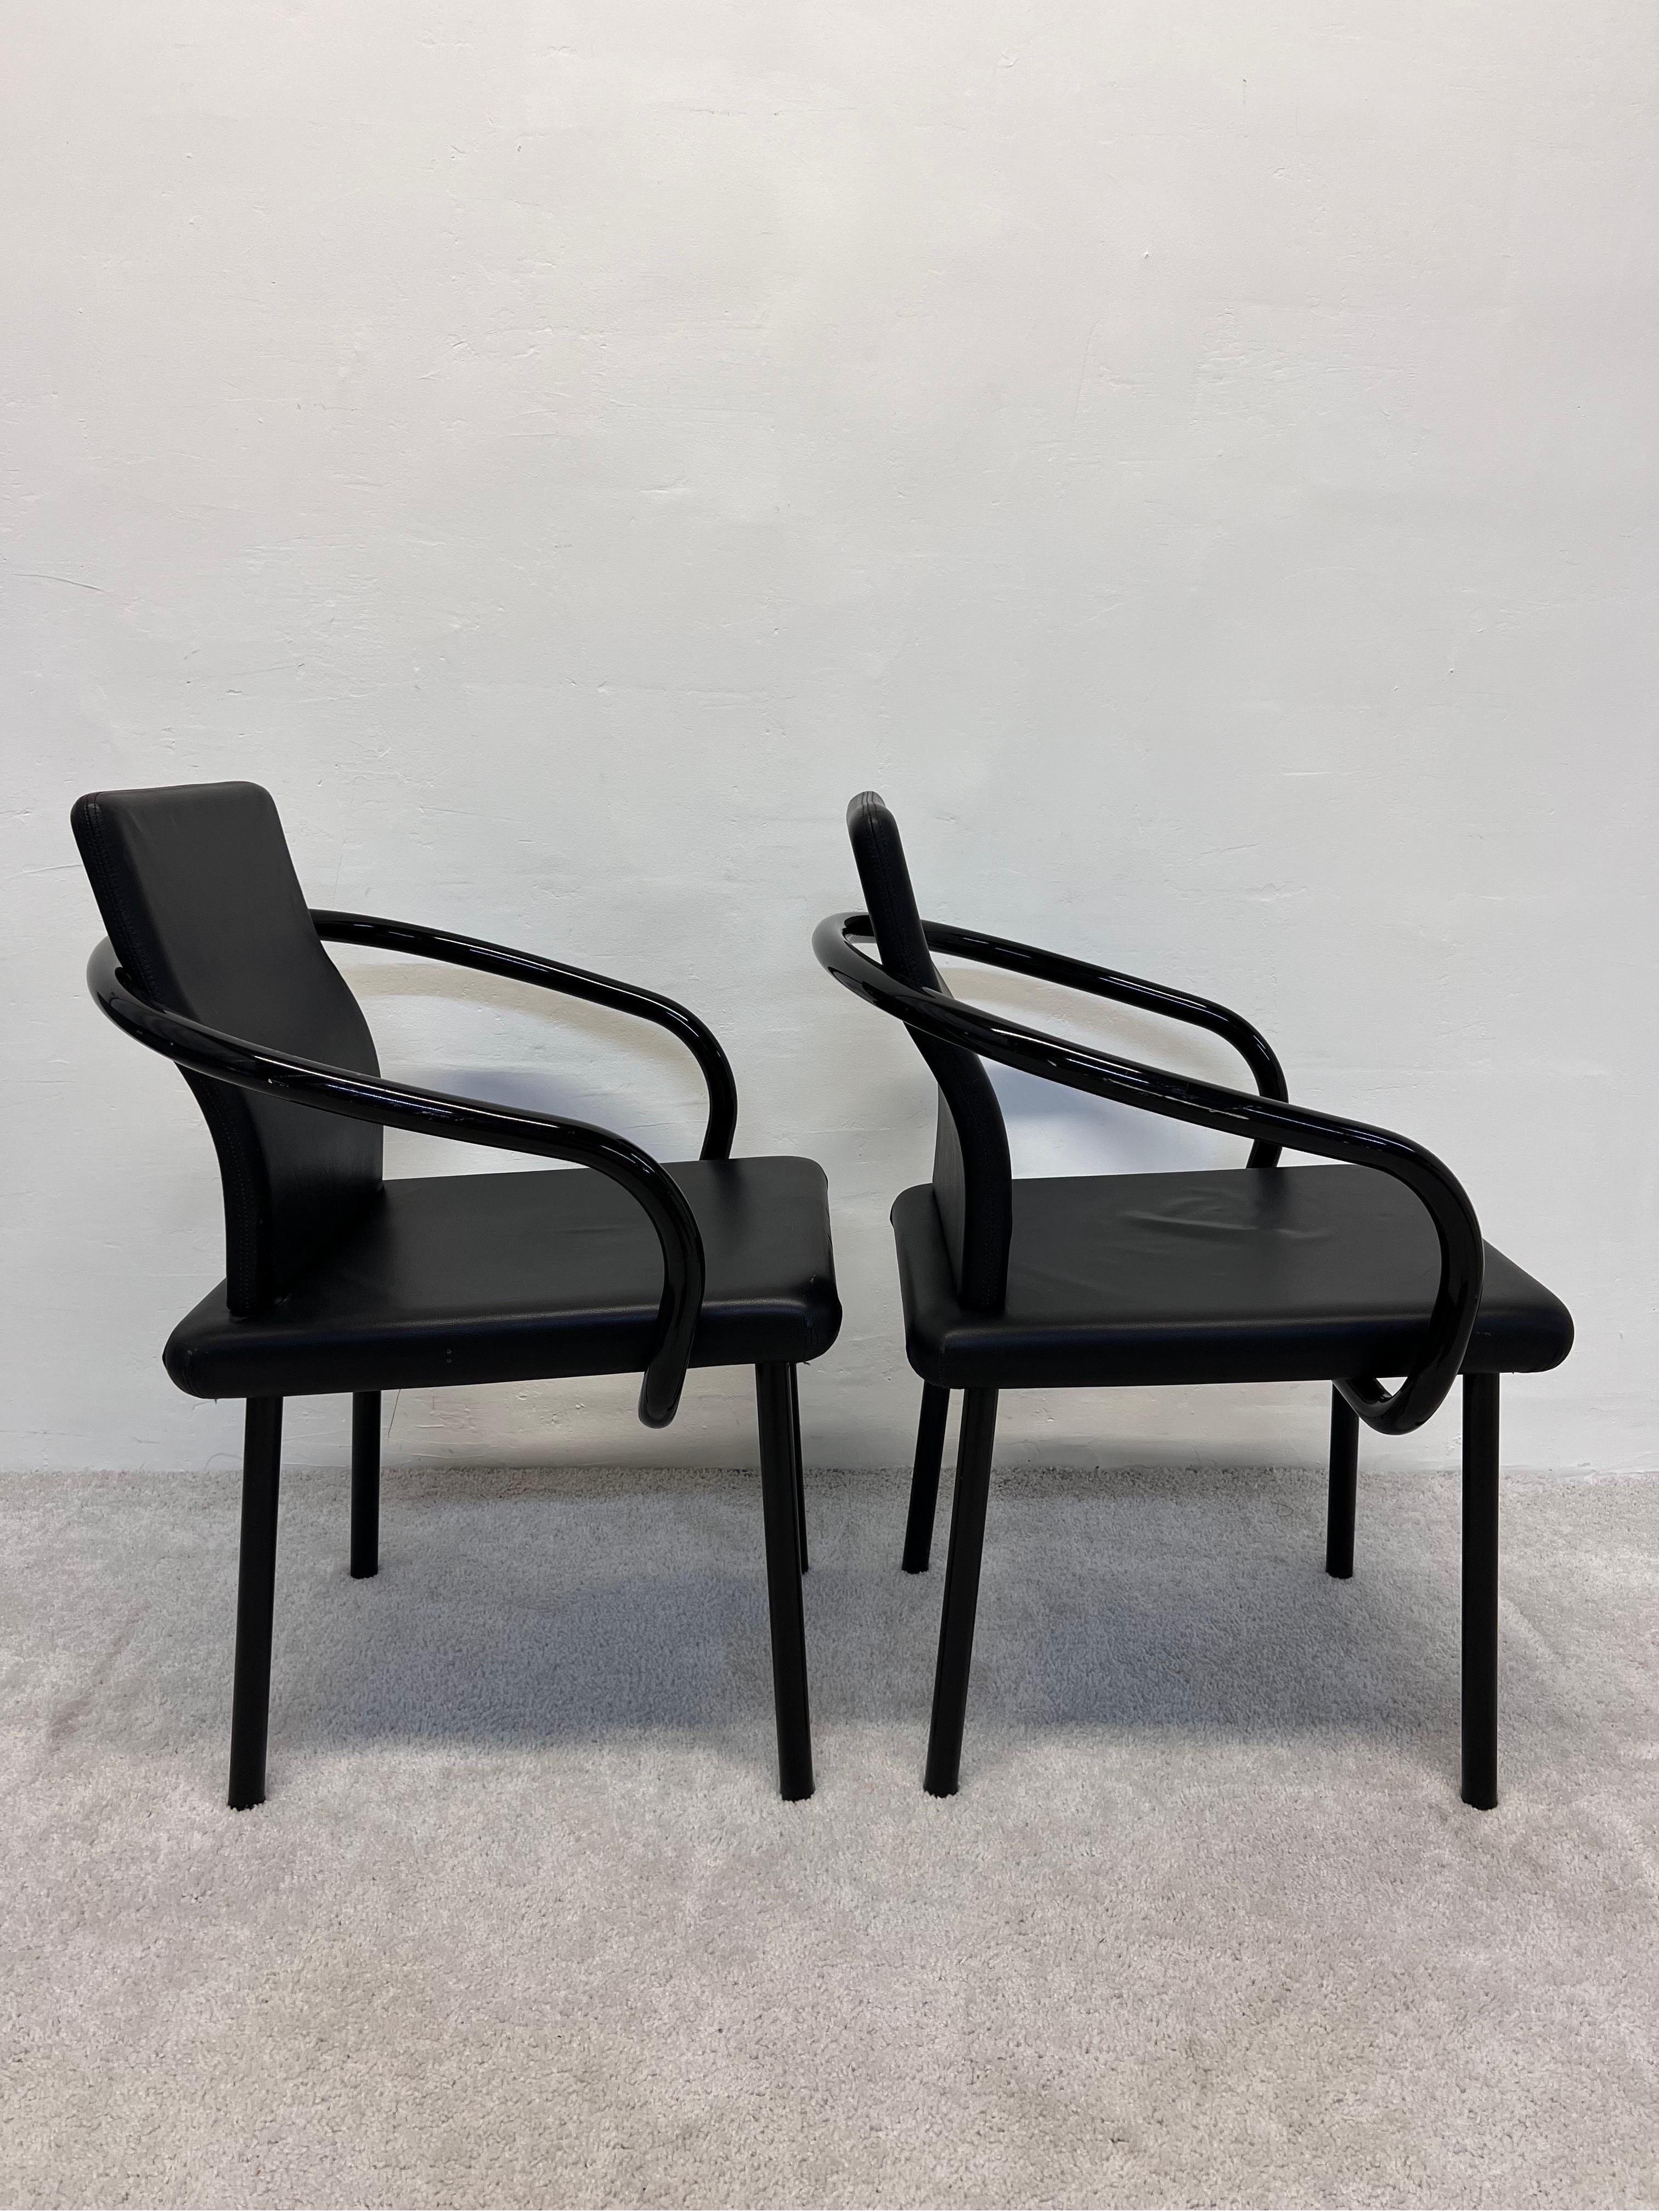 Post-Modern Ettore Sottsass “Mandarin” Black Eco Leather Dining Chairs for Knoll, a Pair For Sale